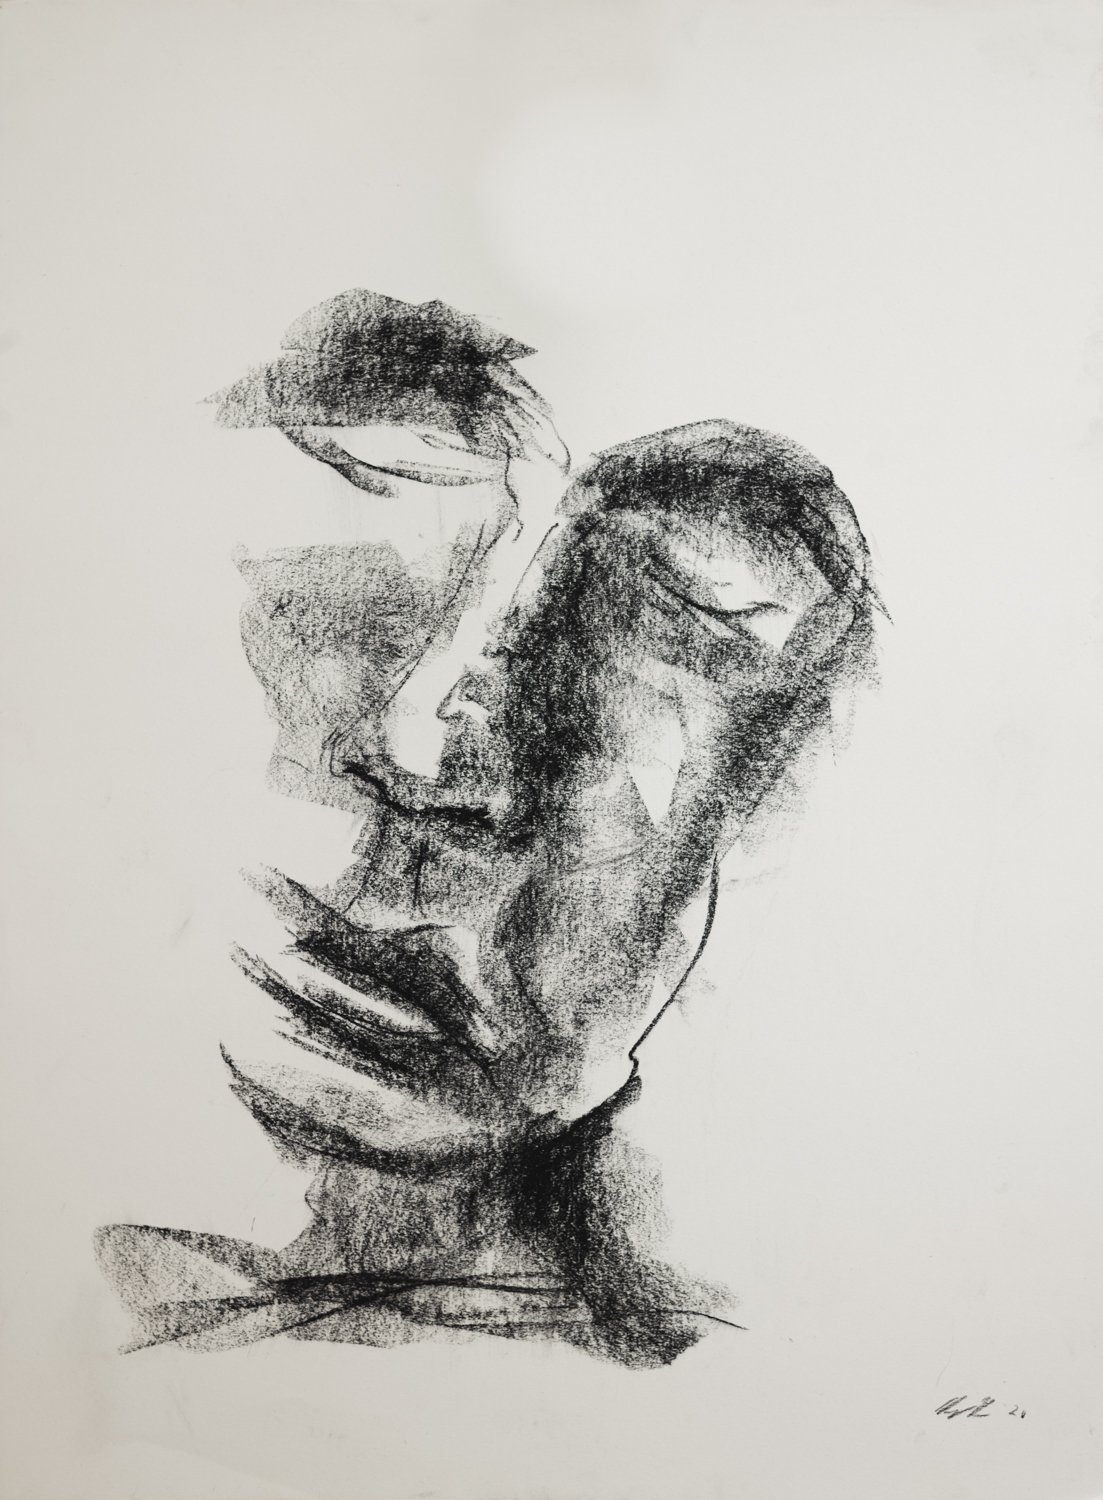   Untitled.       2022. Charcoal on Paper.  18 x 24 in (45.7 x 61 cm) 